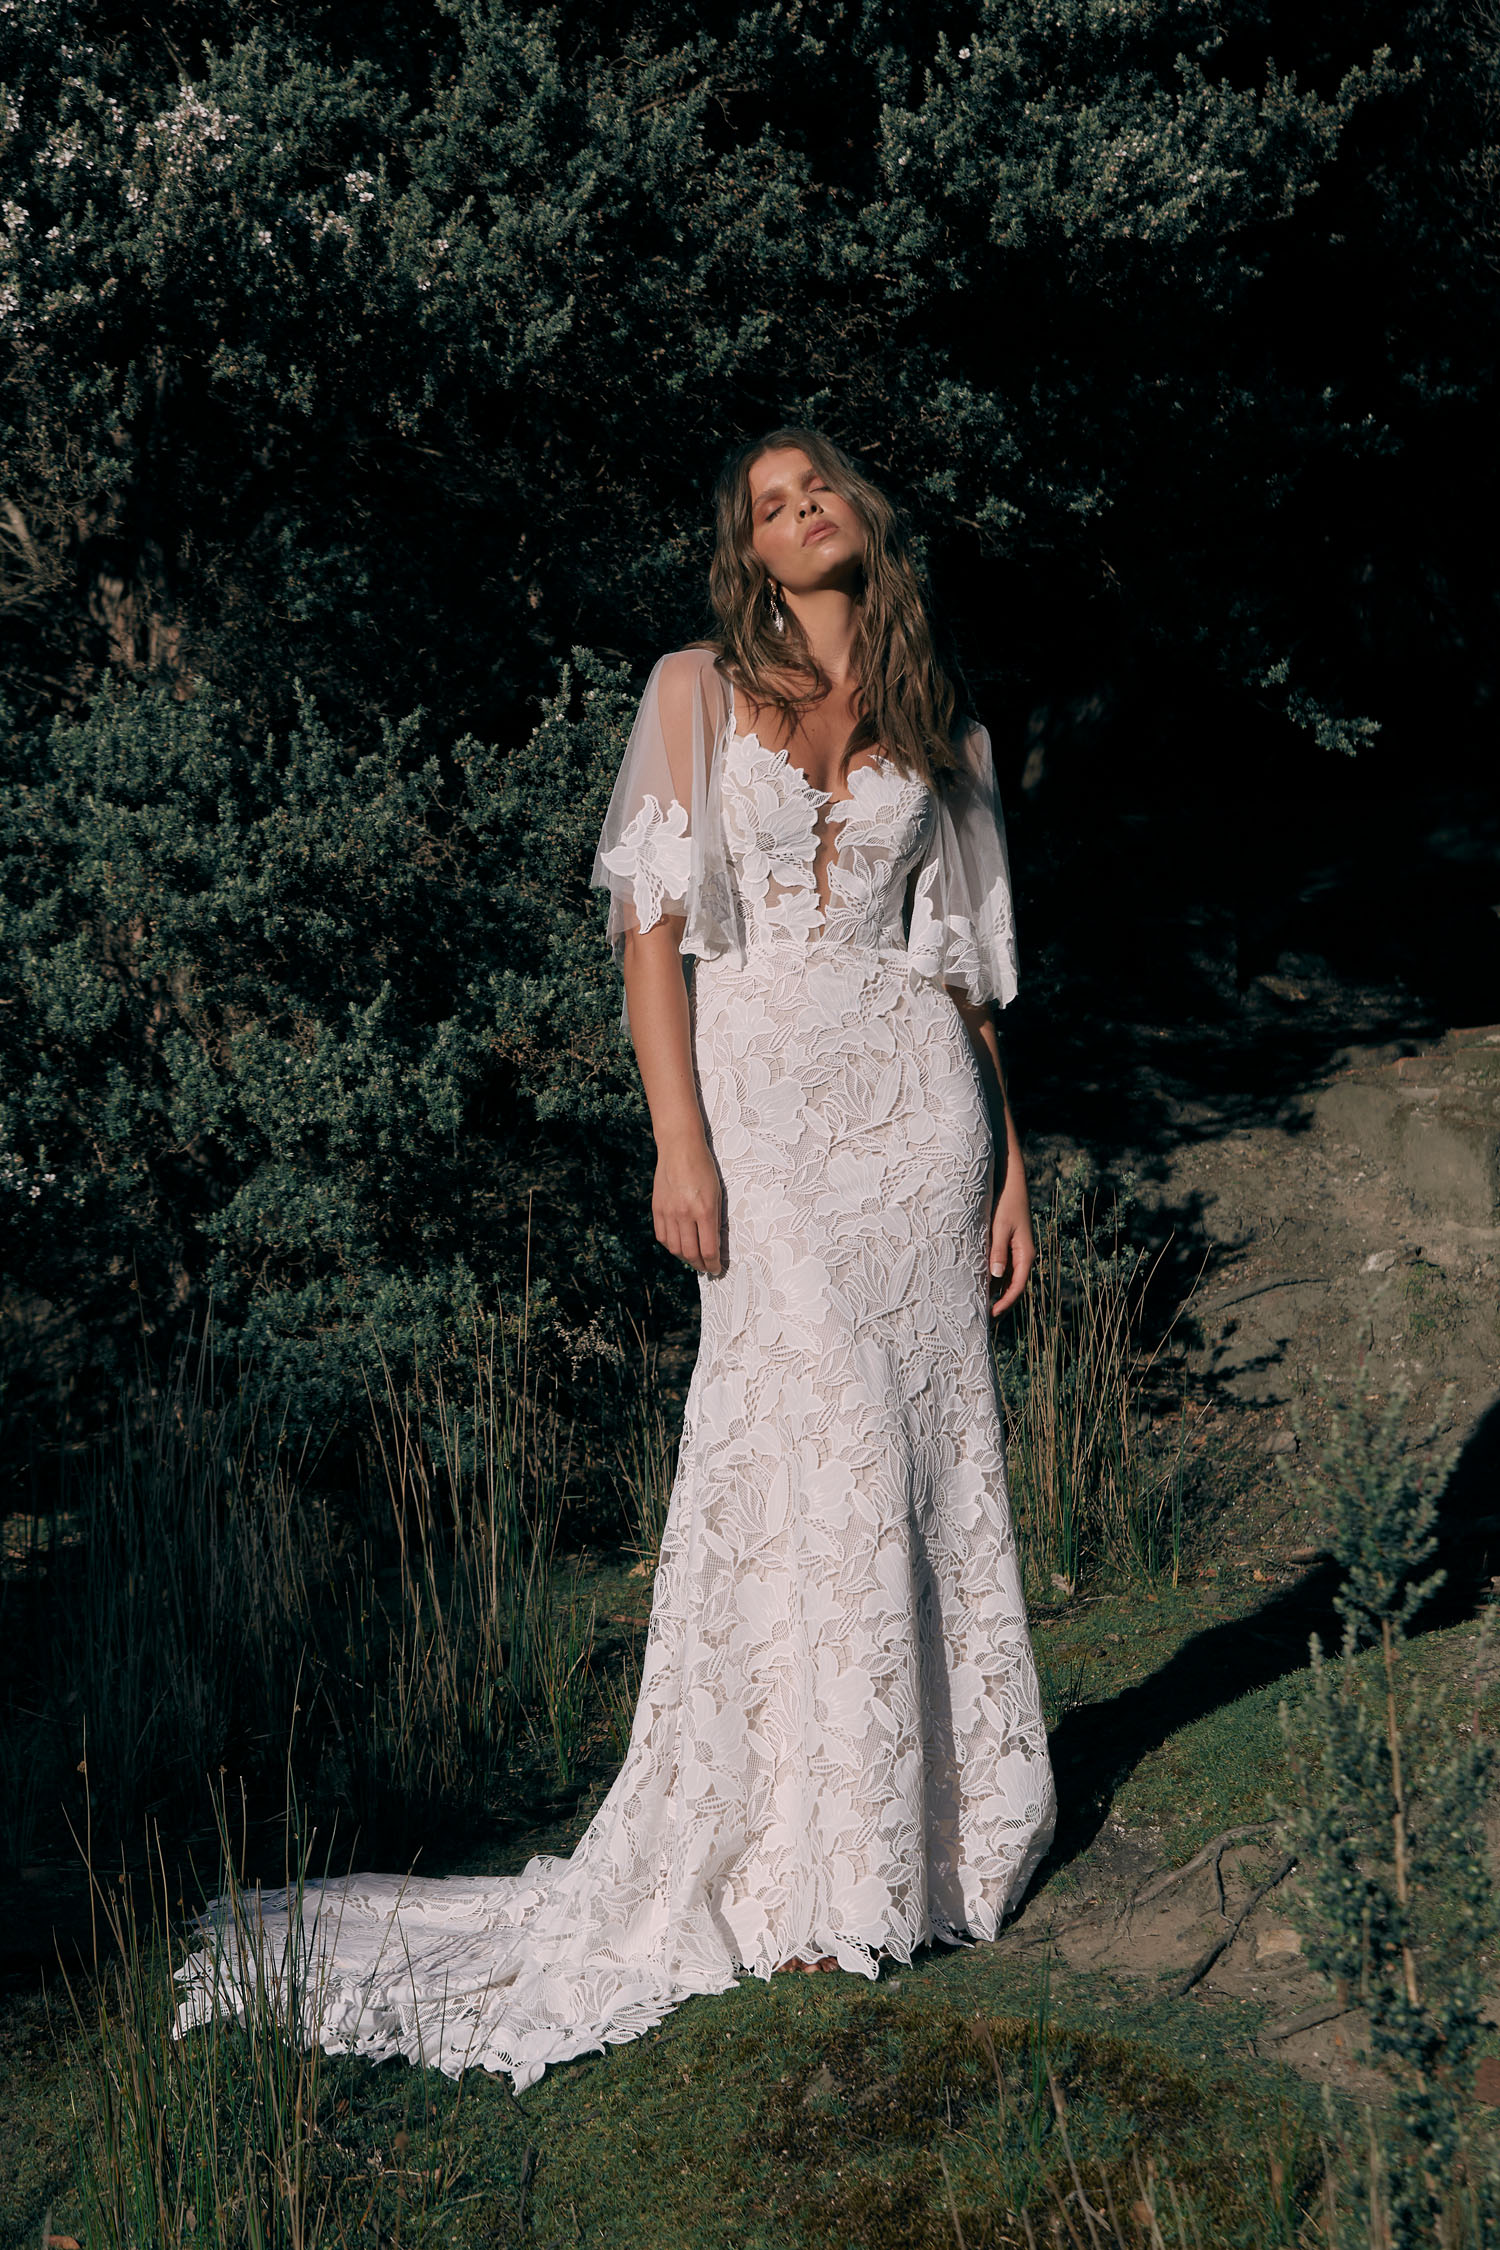 Carlyle Ml20072 Full Length Embroidered Lace Fitted Gown Plunging Neckline Thin Straps Detachable Matching Lace Cape Included Zipper Closure Wedding Dress Madi Lane Bridal 1 1.jpg